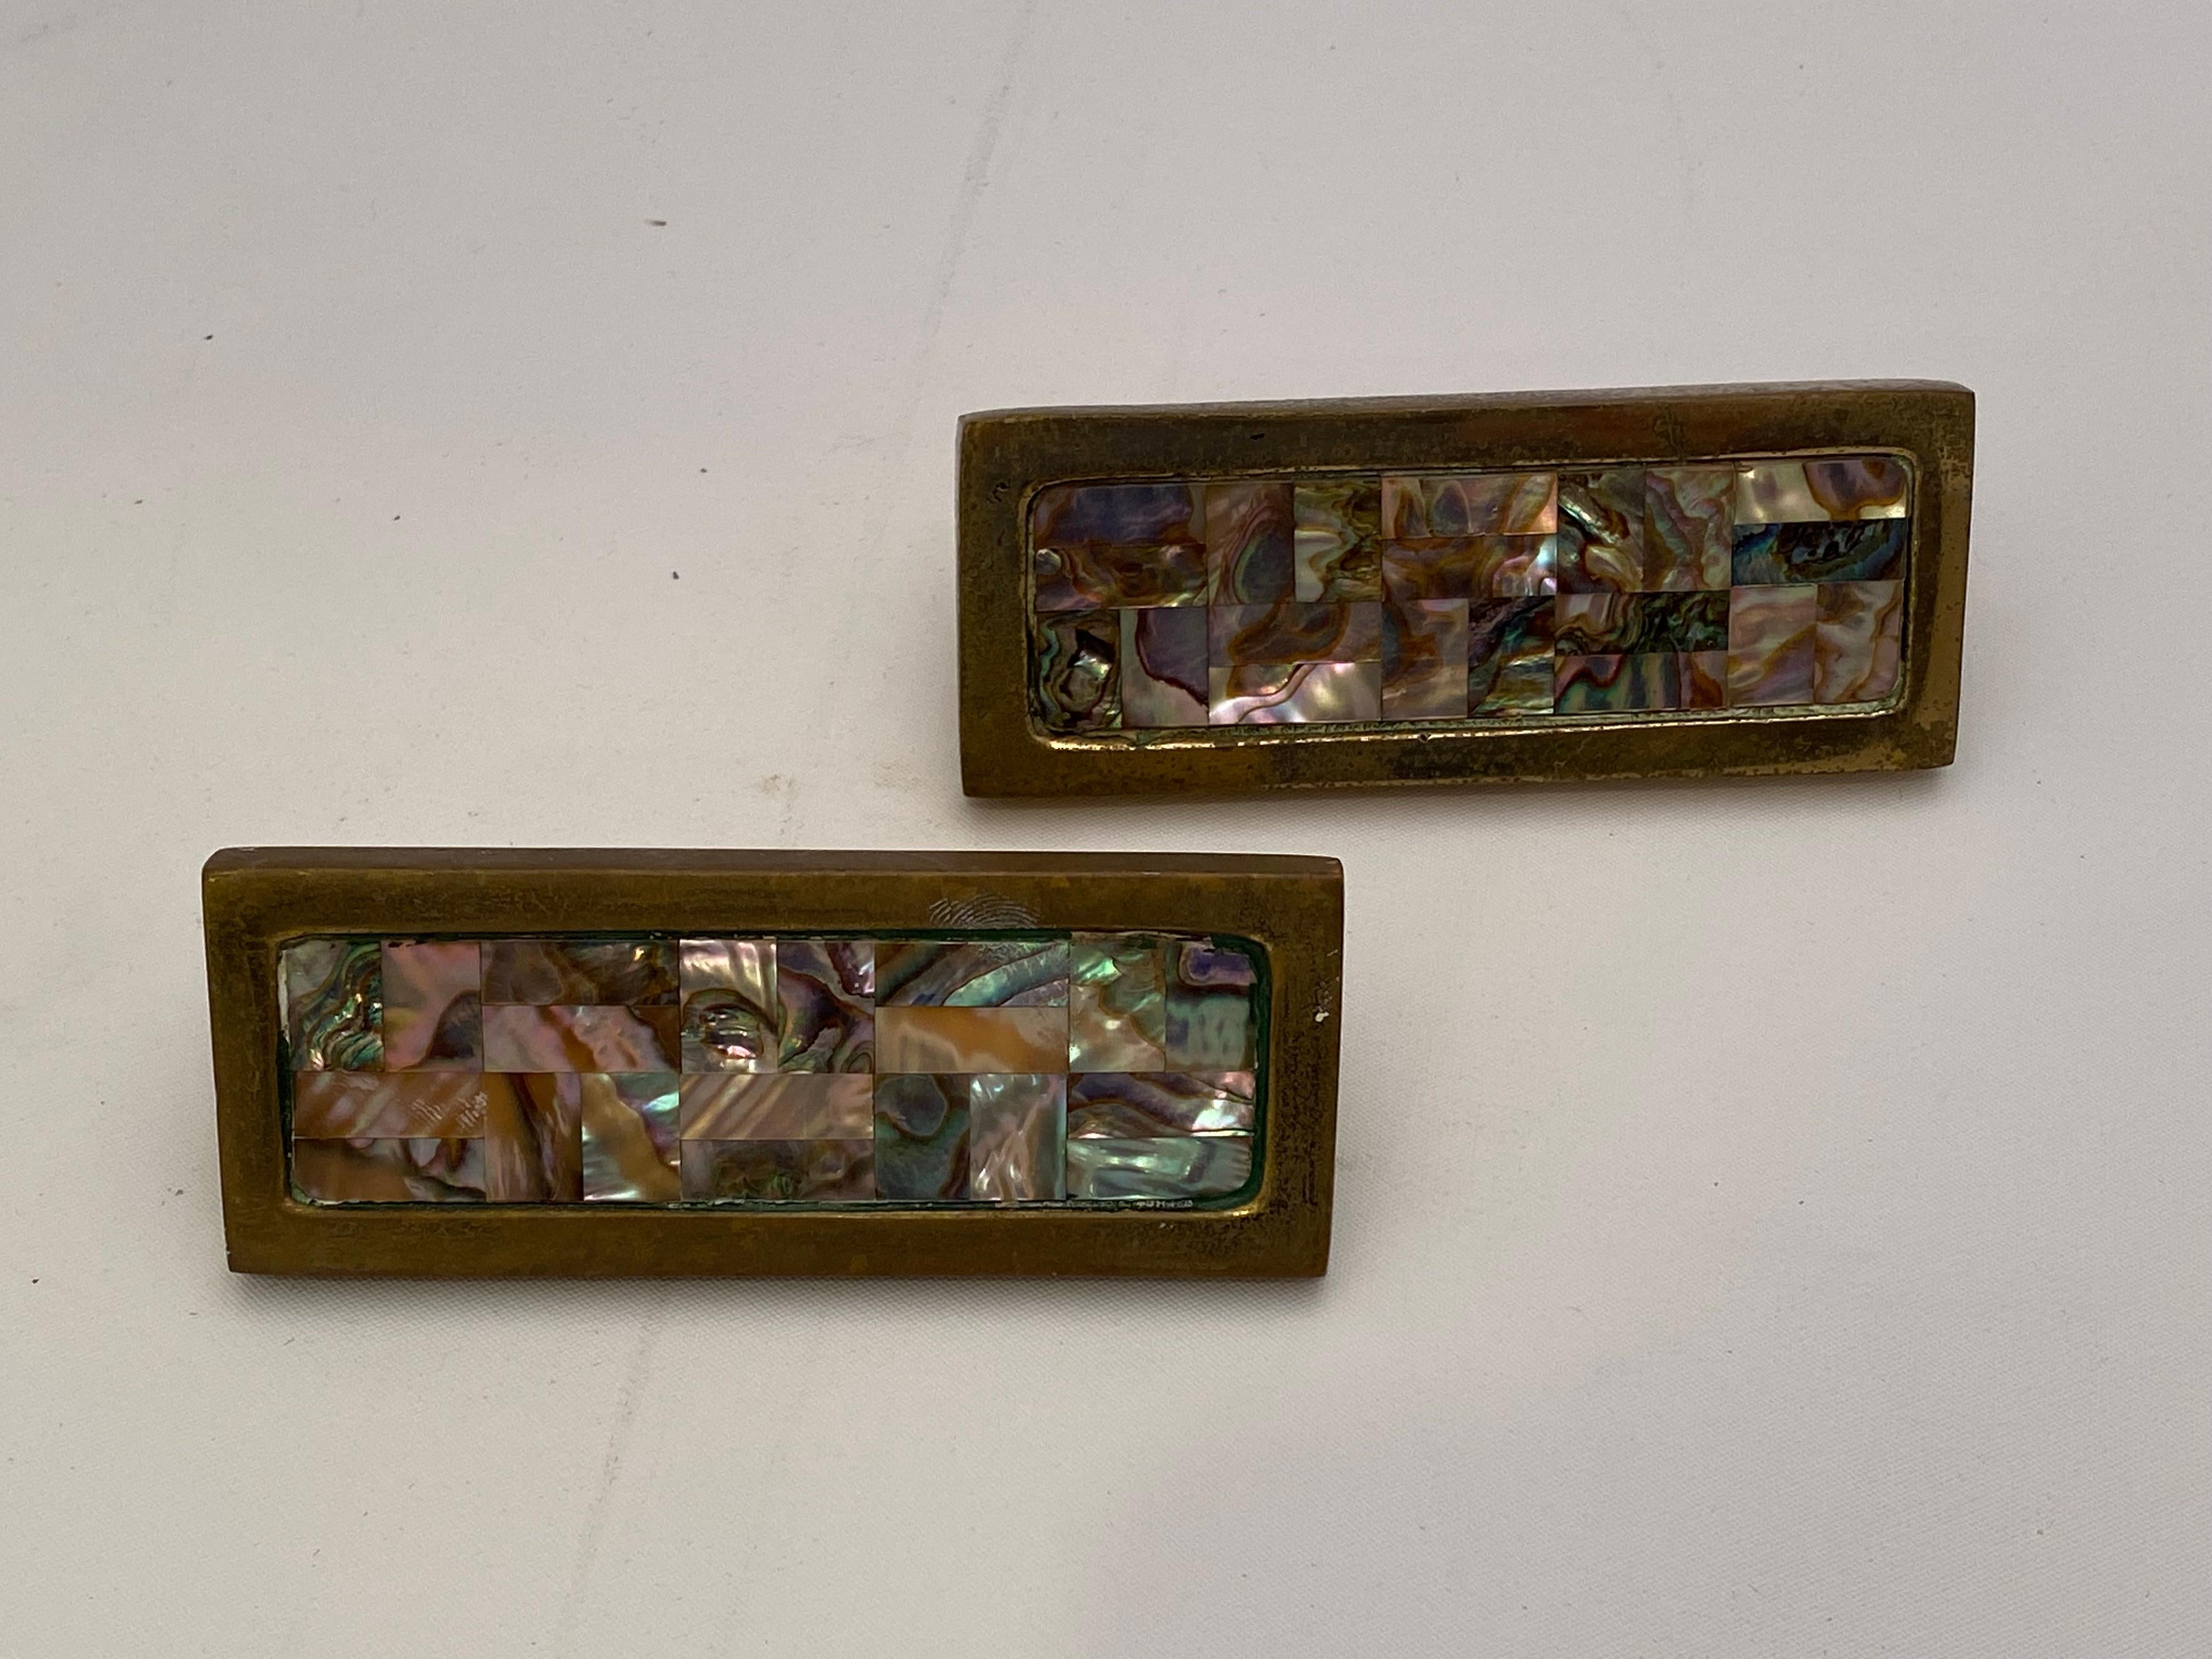 Pepe Mendoza style solid brass and inlaid abalone shell rectangular hardware pulls. Period 1960s hardware great for furniture or door hardware. Stamped on reverse, Japan. Good overall condition with some tarnish, wear and scratches from